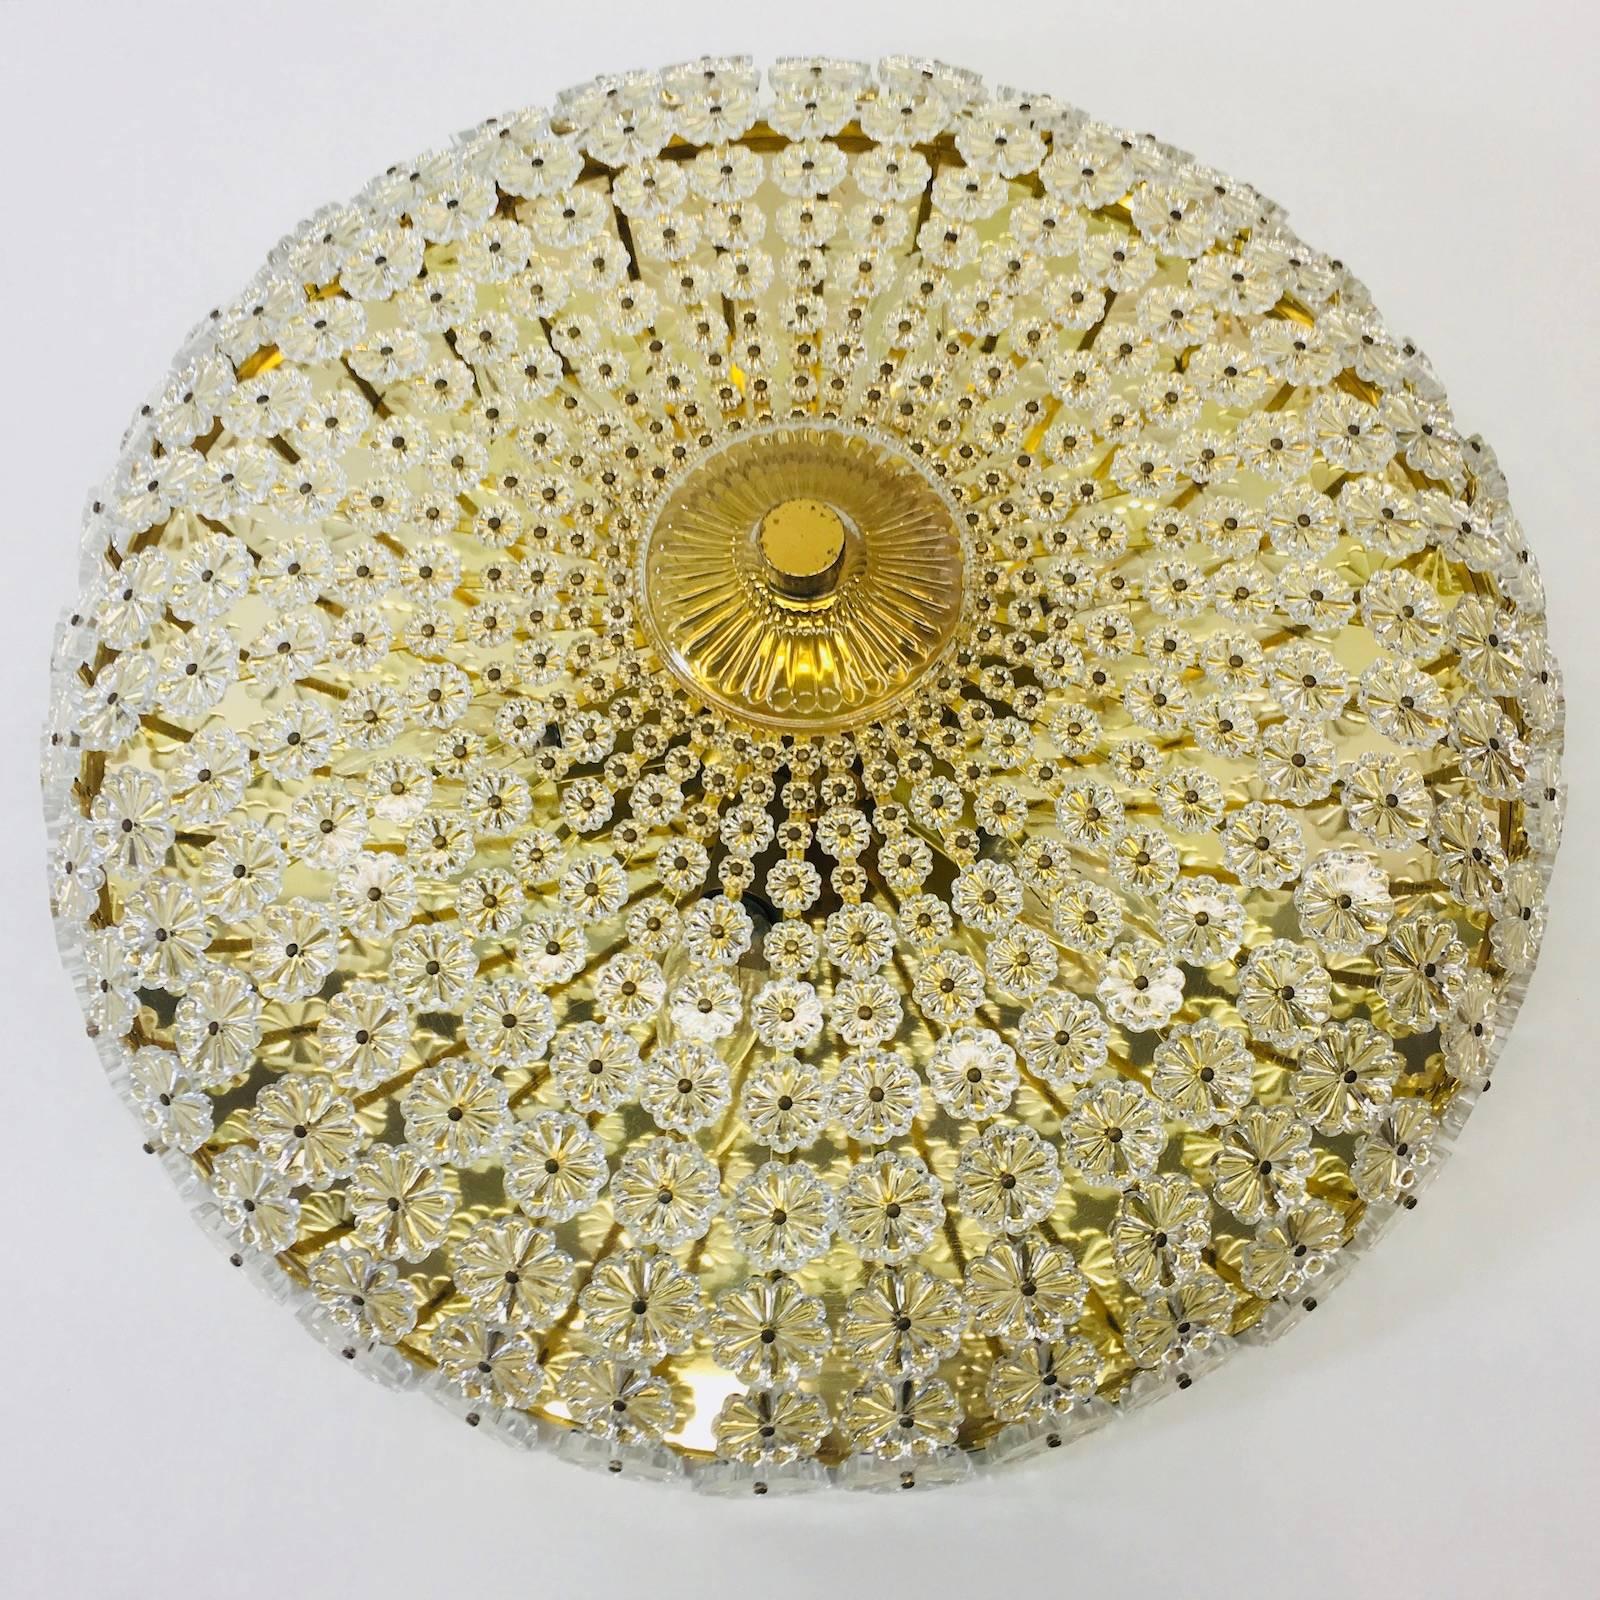 Large flower shaped flush mount designed by Emil Stejnar in the 1960s in Austria. It features a brass frame with hundreds of lovely crystal glass pieces designed to portray the image of a spectacular flower surrounding the frame. This flush mount